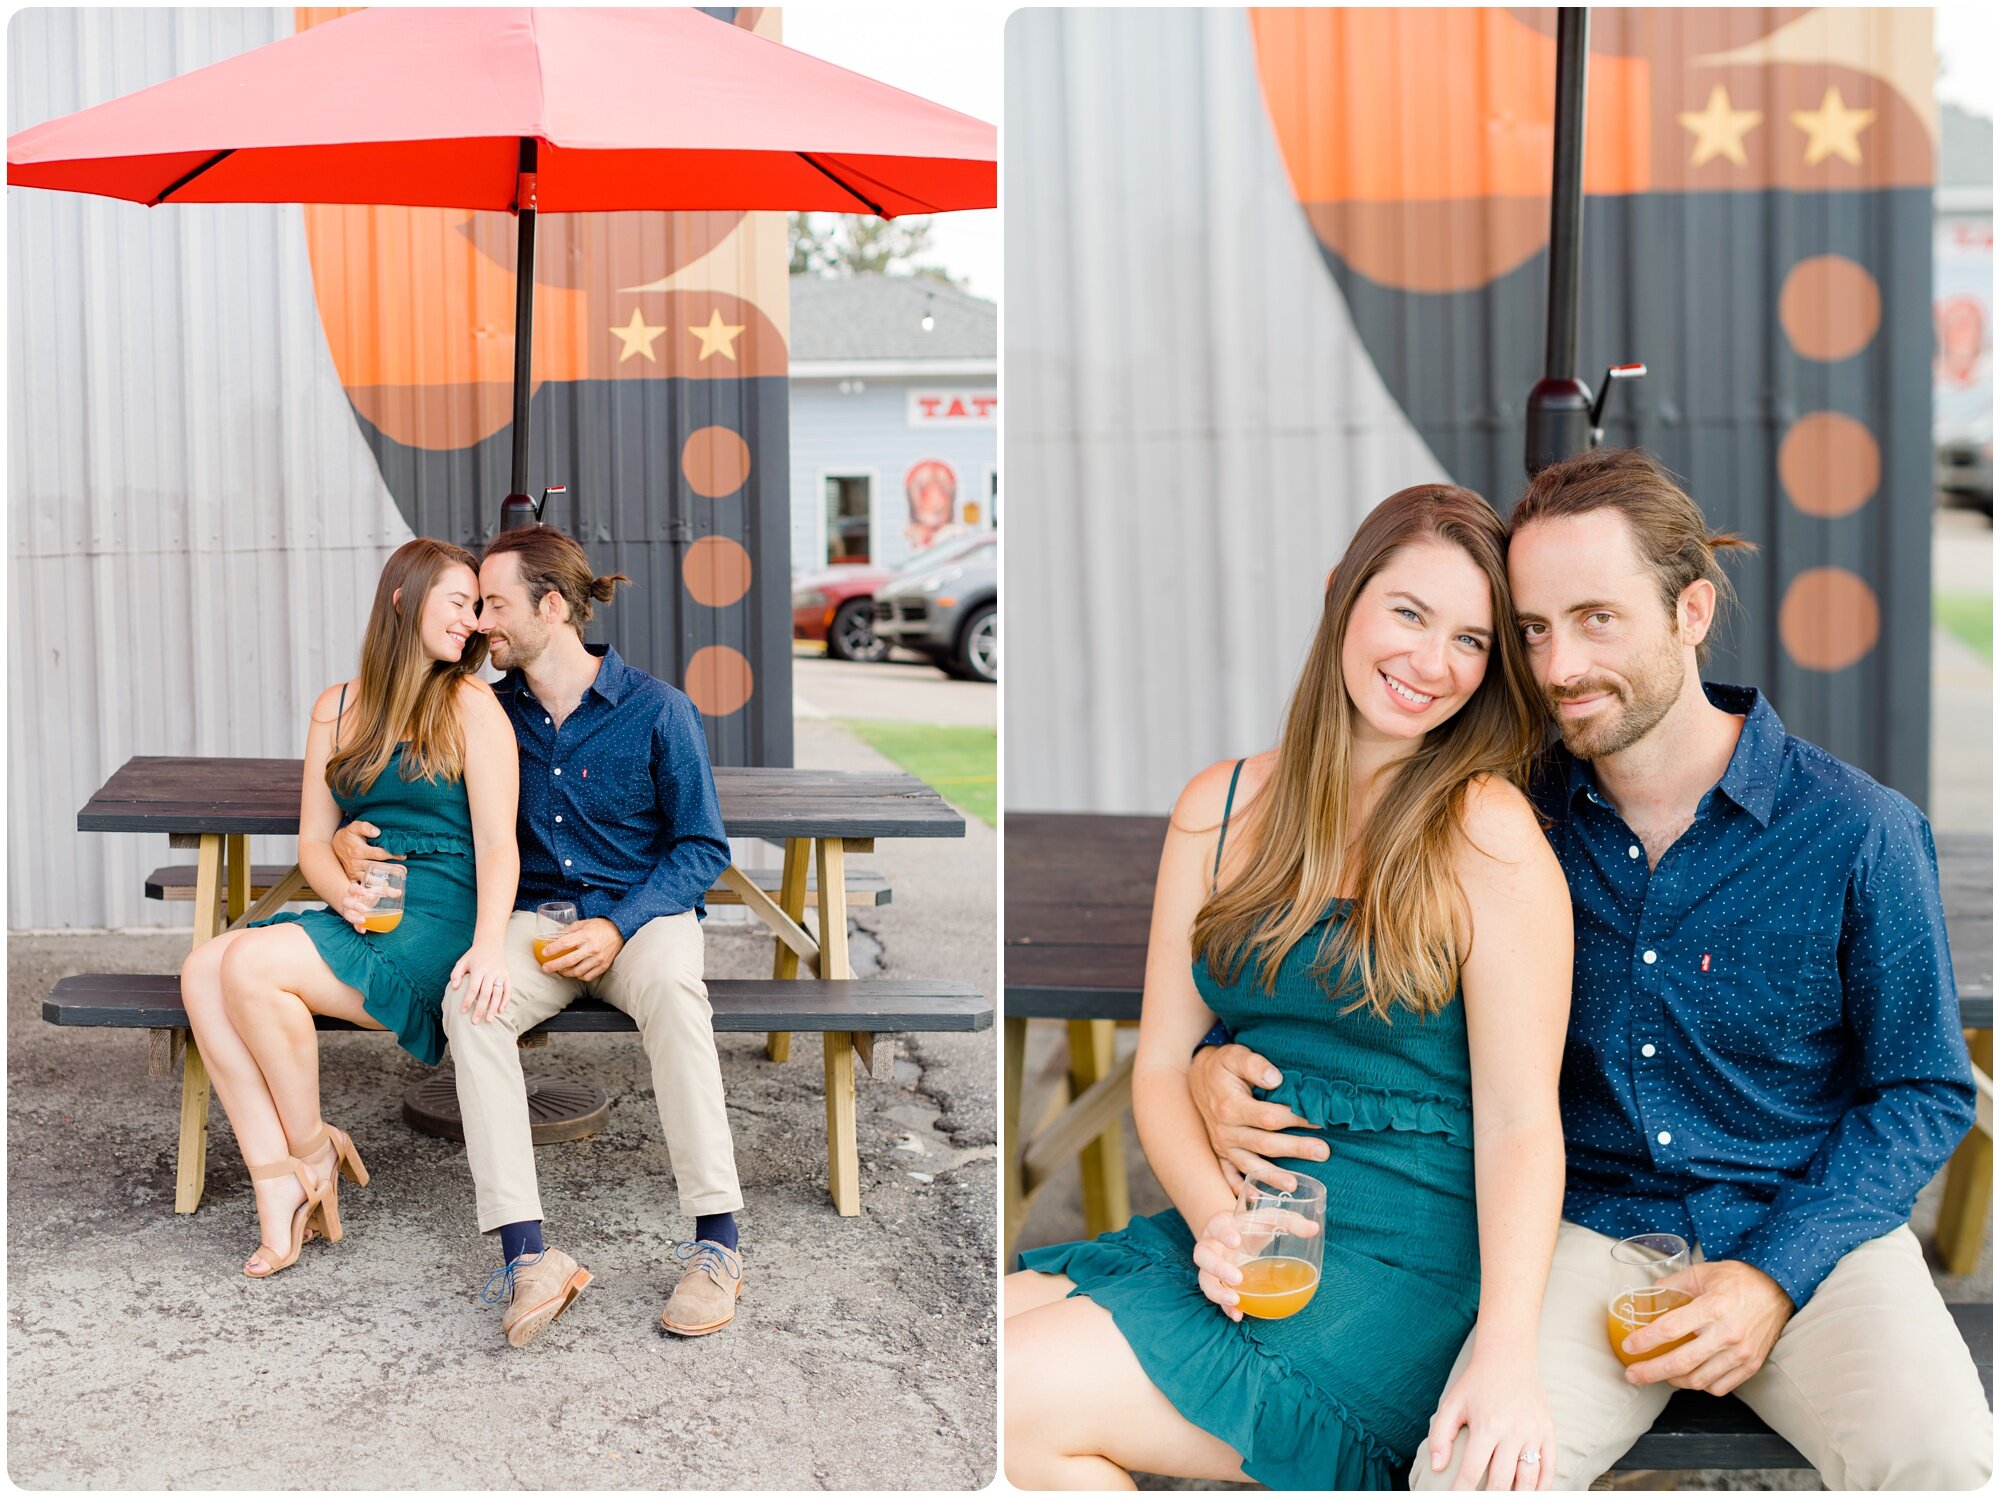 outdoor_bar_engagement_session_sunset_beer_kailee_dimeglio_photography_0001.jpg